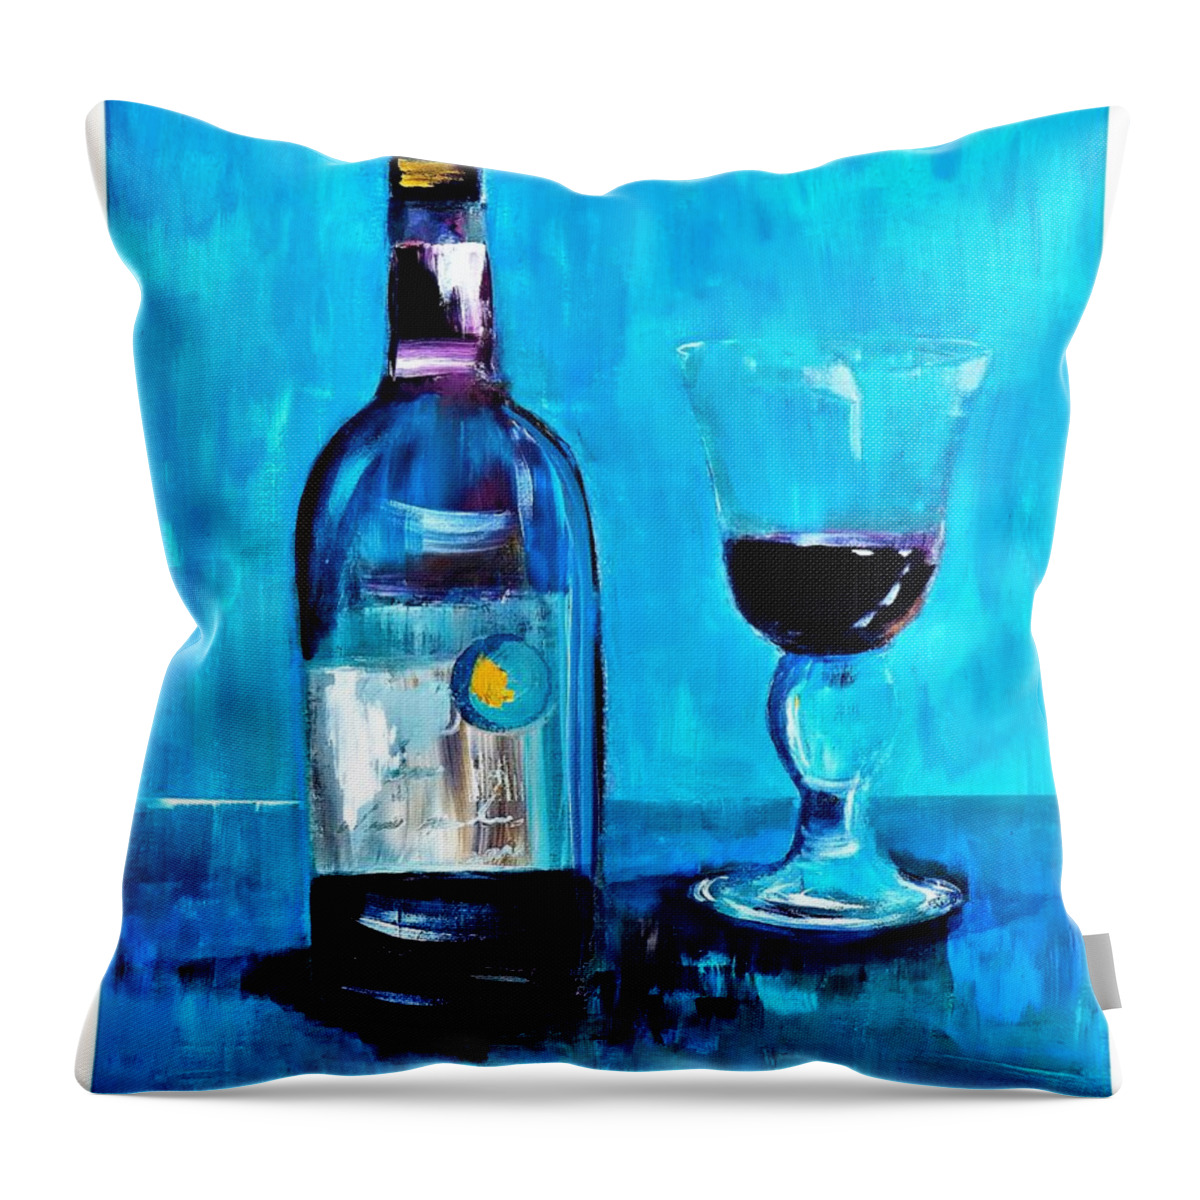 Gold Throw Pillow featuring the digital art The Gold Star Wine Painting by Lisa Kaiser